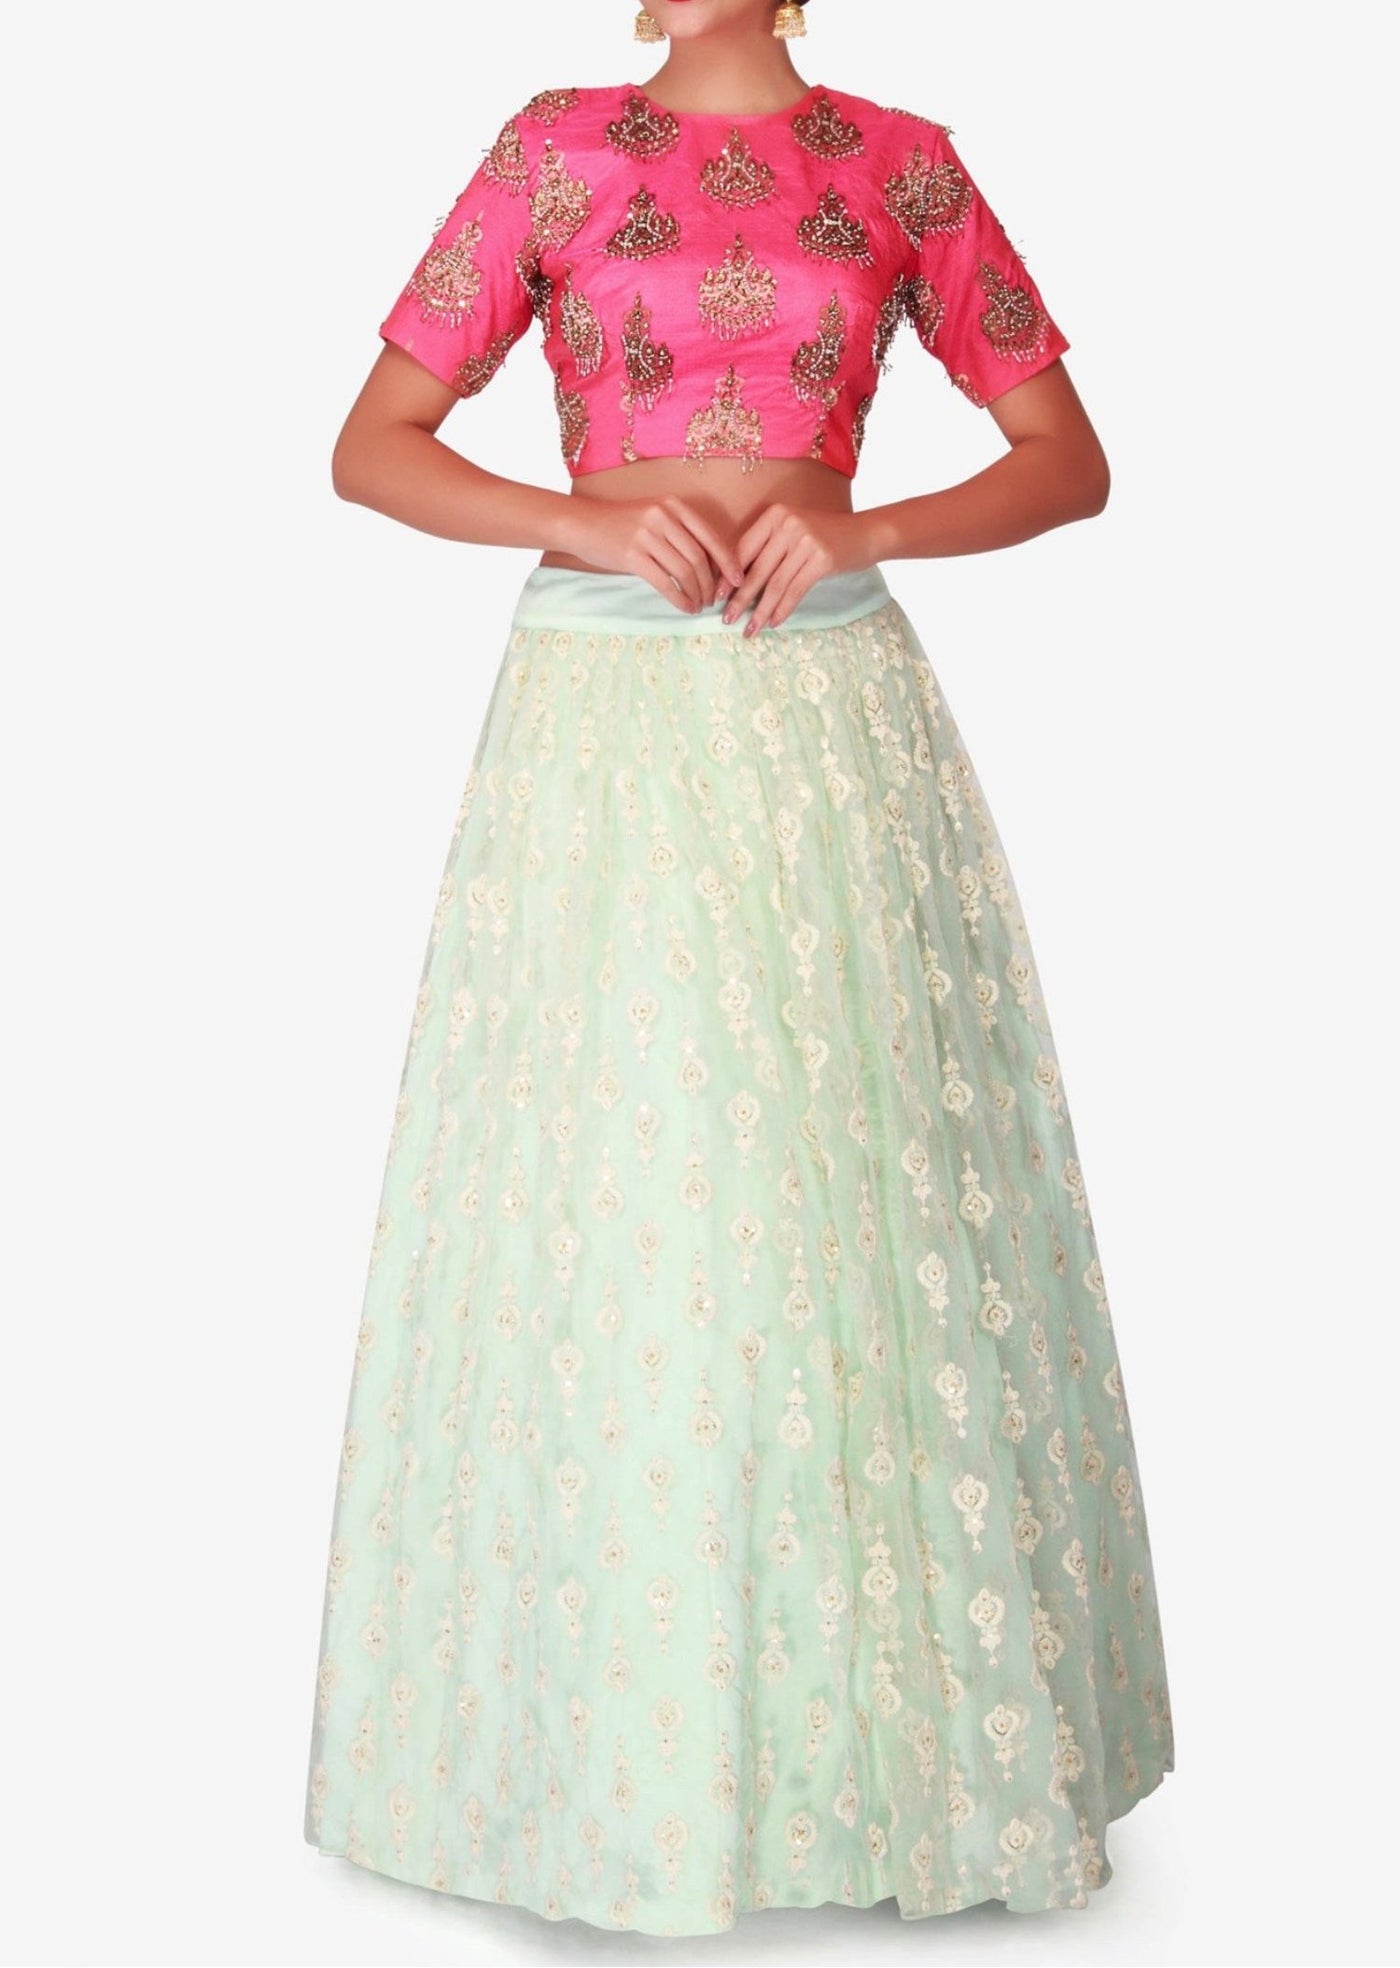 Mint blue lehenga in net - Indian Clothing in Denver, CO, Aurora, CO, Boulder, CO, Fort Collins, CO, Colorado Springs, CO, Parker, CO, Highlands Ranch, CO, Cherry Creek, CO, Centennial, CO, and Longmont, CO. Nationwide shipping USA - India Fashion X